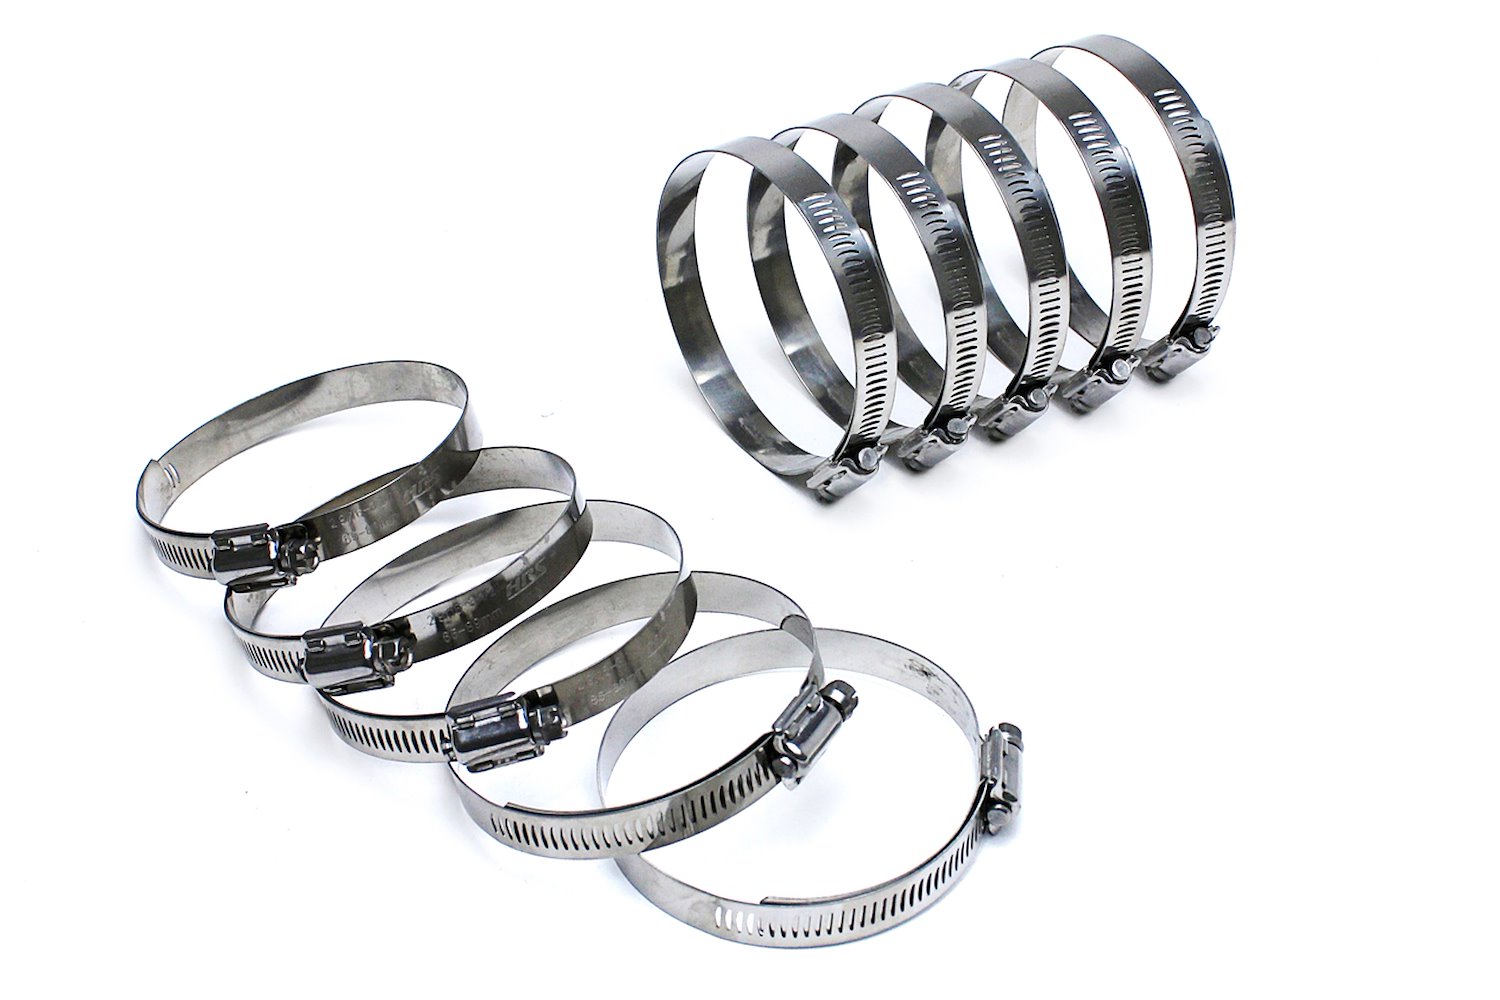 SSWC-46-70x10 Stainless Steel Worm Gear Hose Clamp, Effective Range: 1-13/16 in.- 2-3/4 in., 10Pc